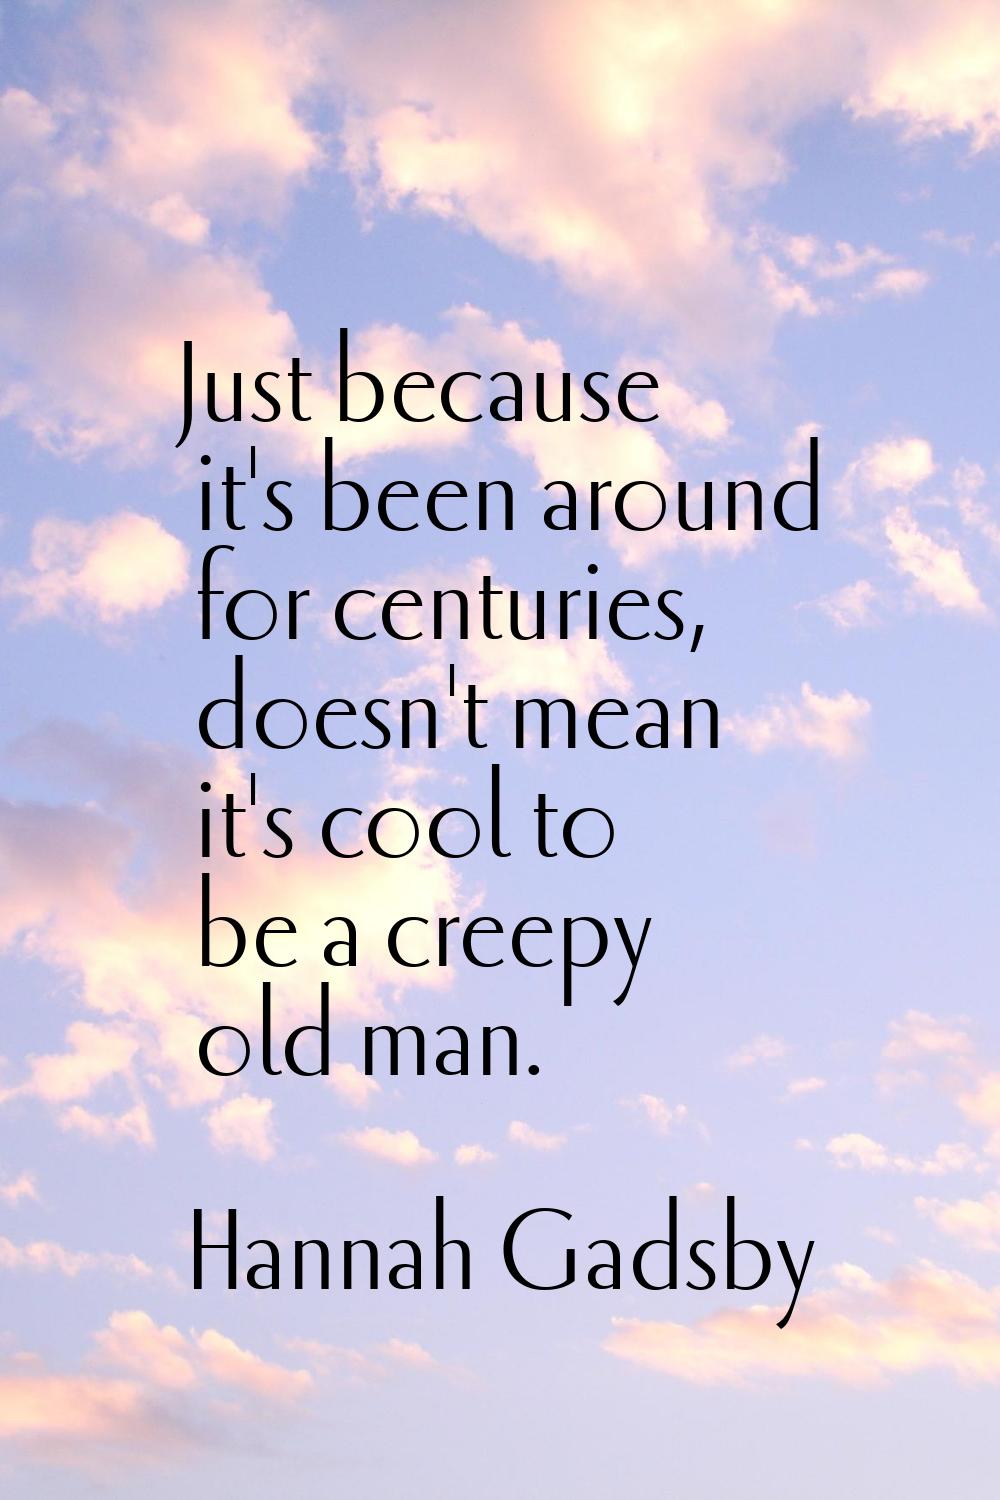 Just because it's been around for centuries, doesn't mean it's cool to be a creepy old man.